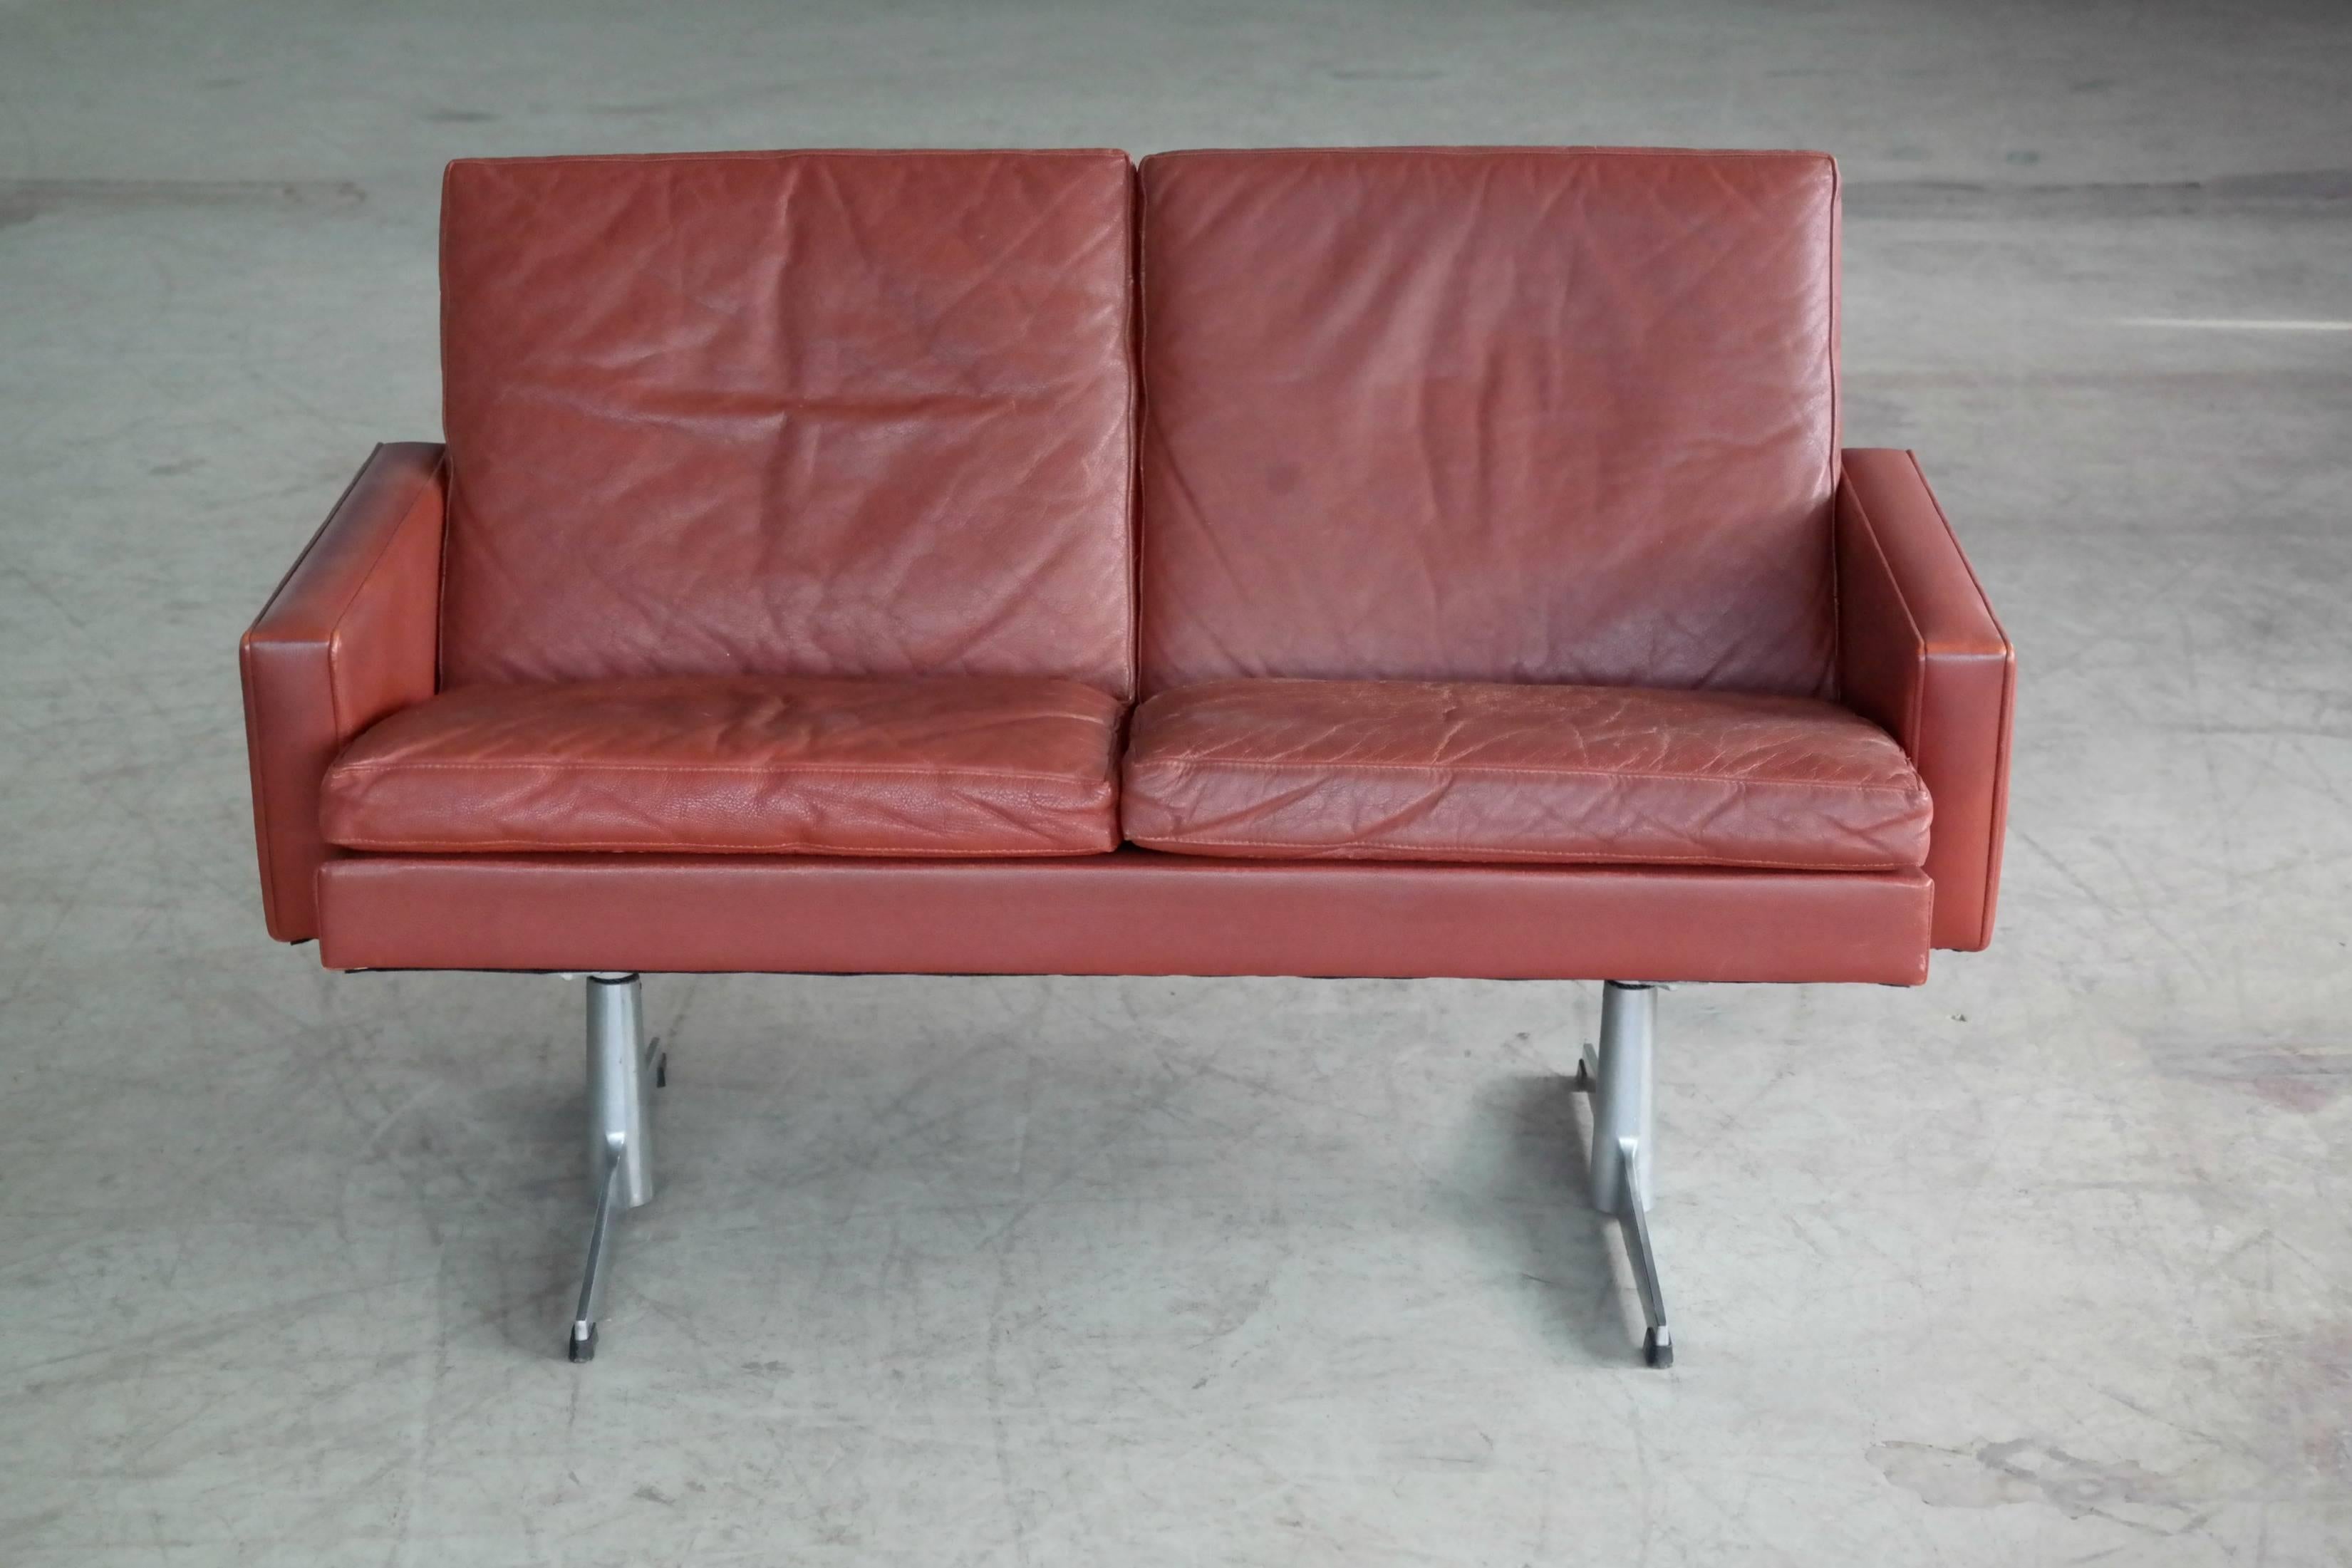 Mid-20th Century Danish 1960s Two-Seat Airport Sofa in Red Leather